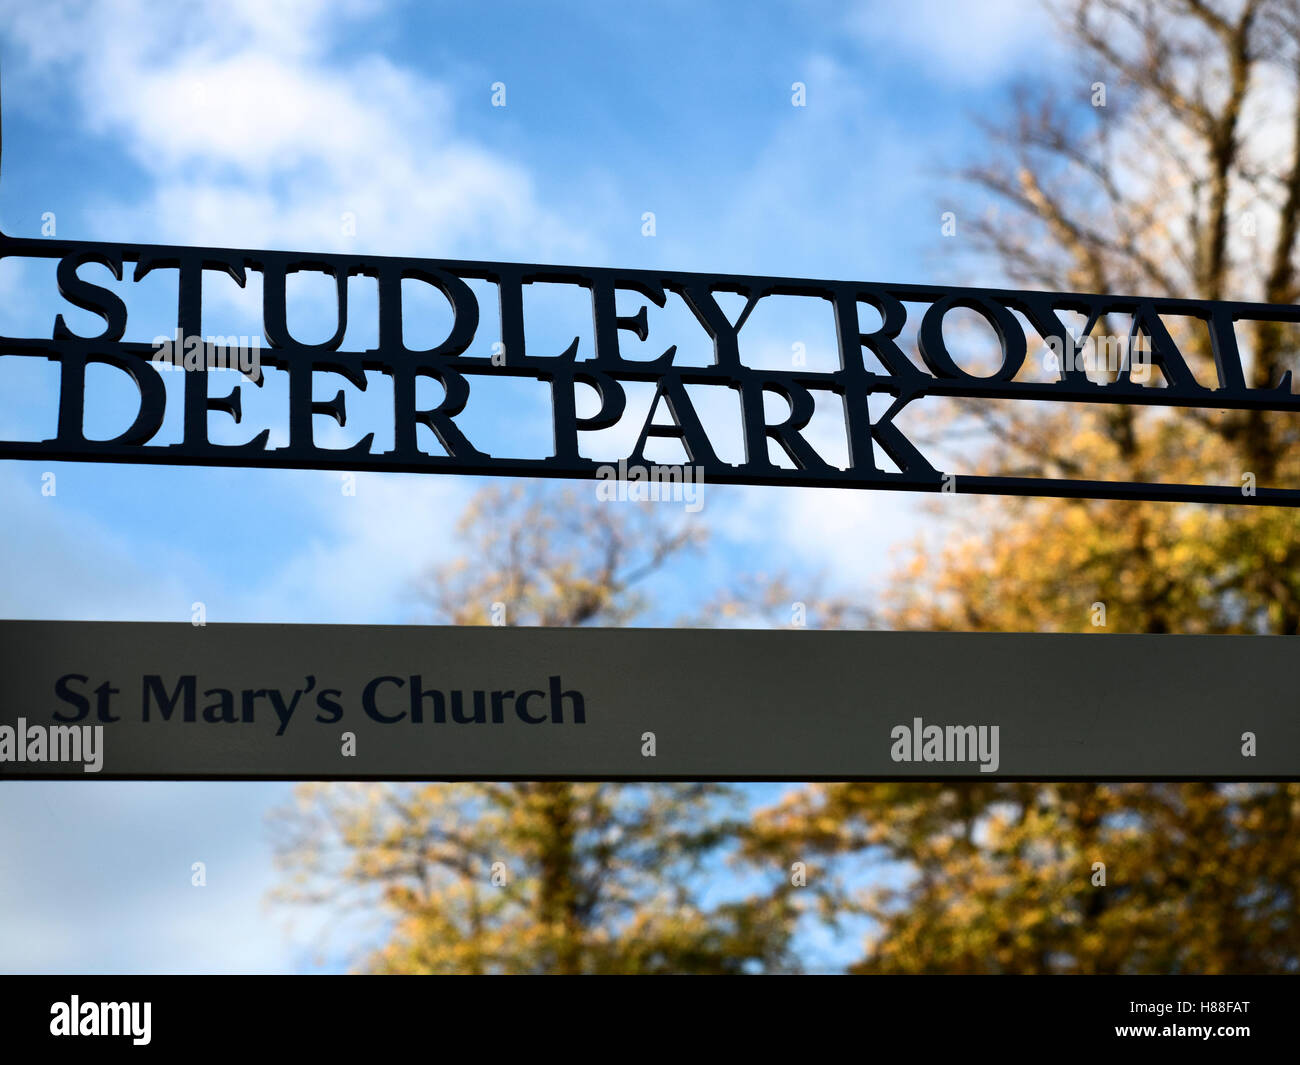 Studley Royal Deer Park and St Marys Church Sign at Studley Royal Ripon Yorkshire England Stock Photo